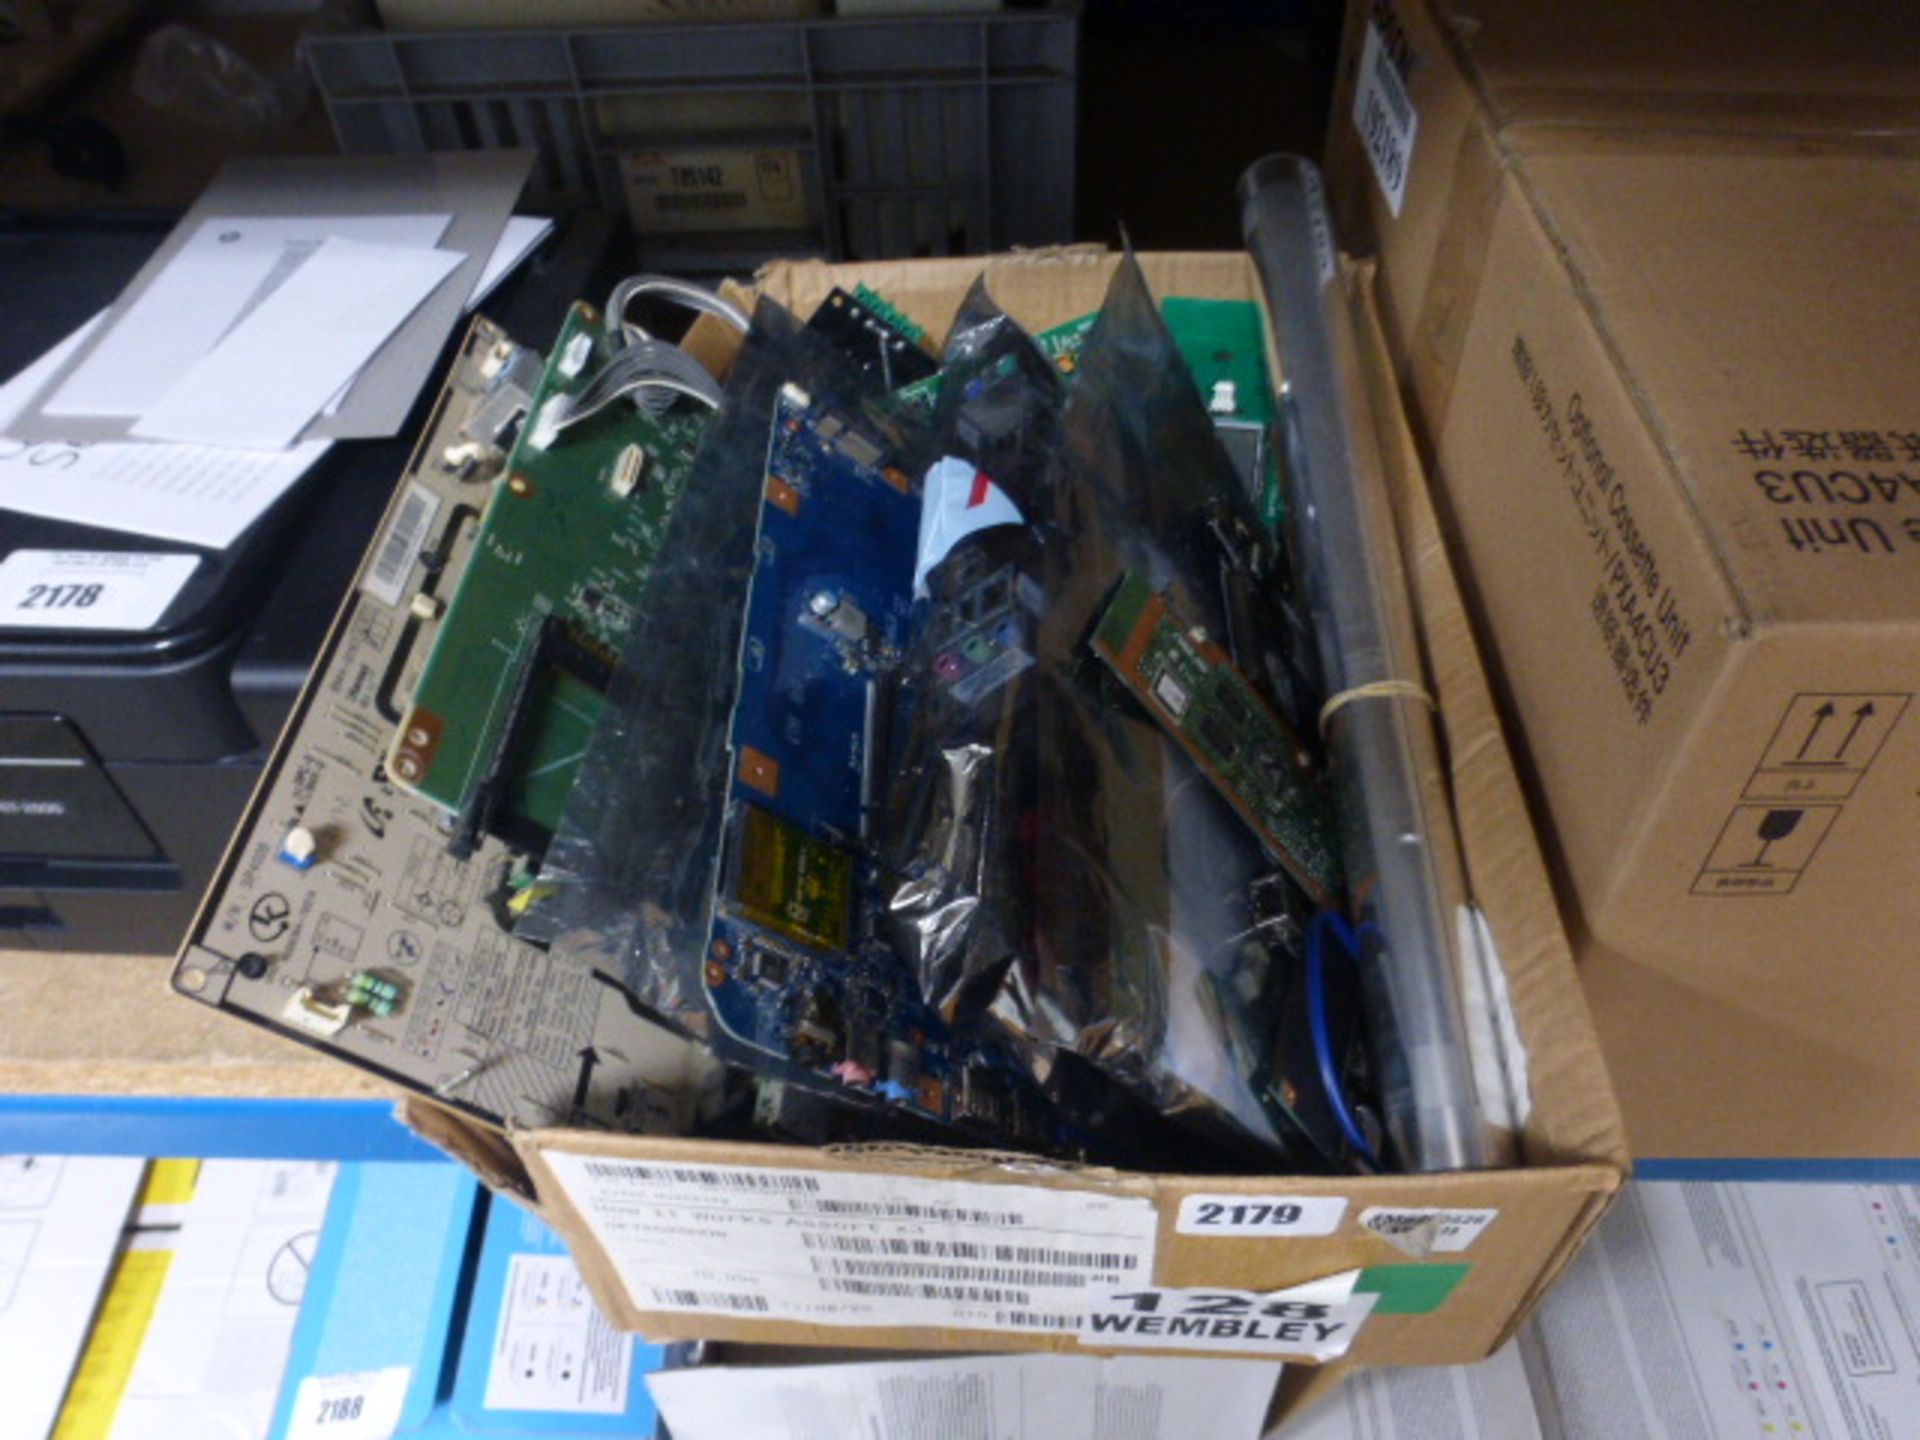 Box containing various laptop, Pc and mother boards